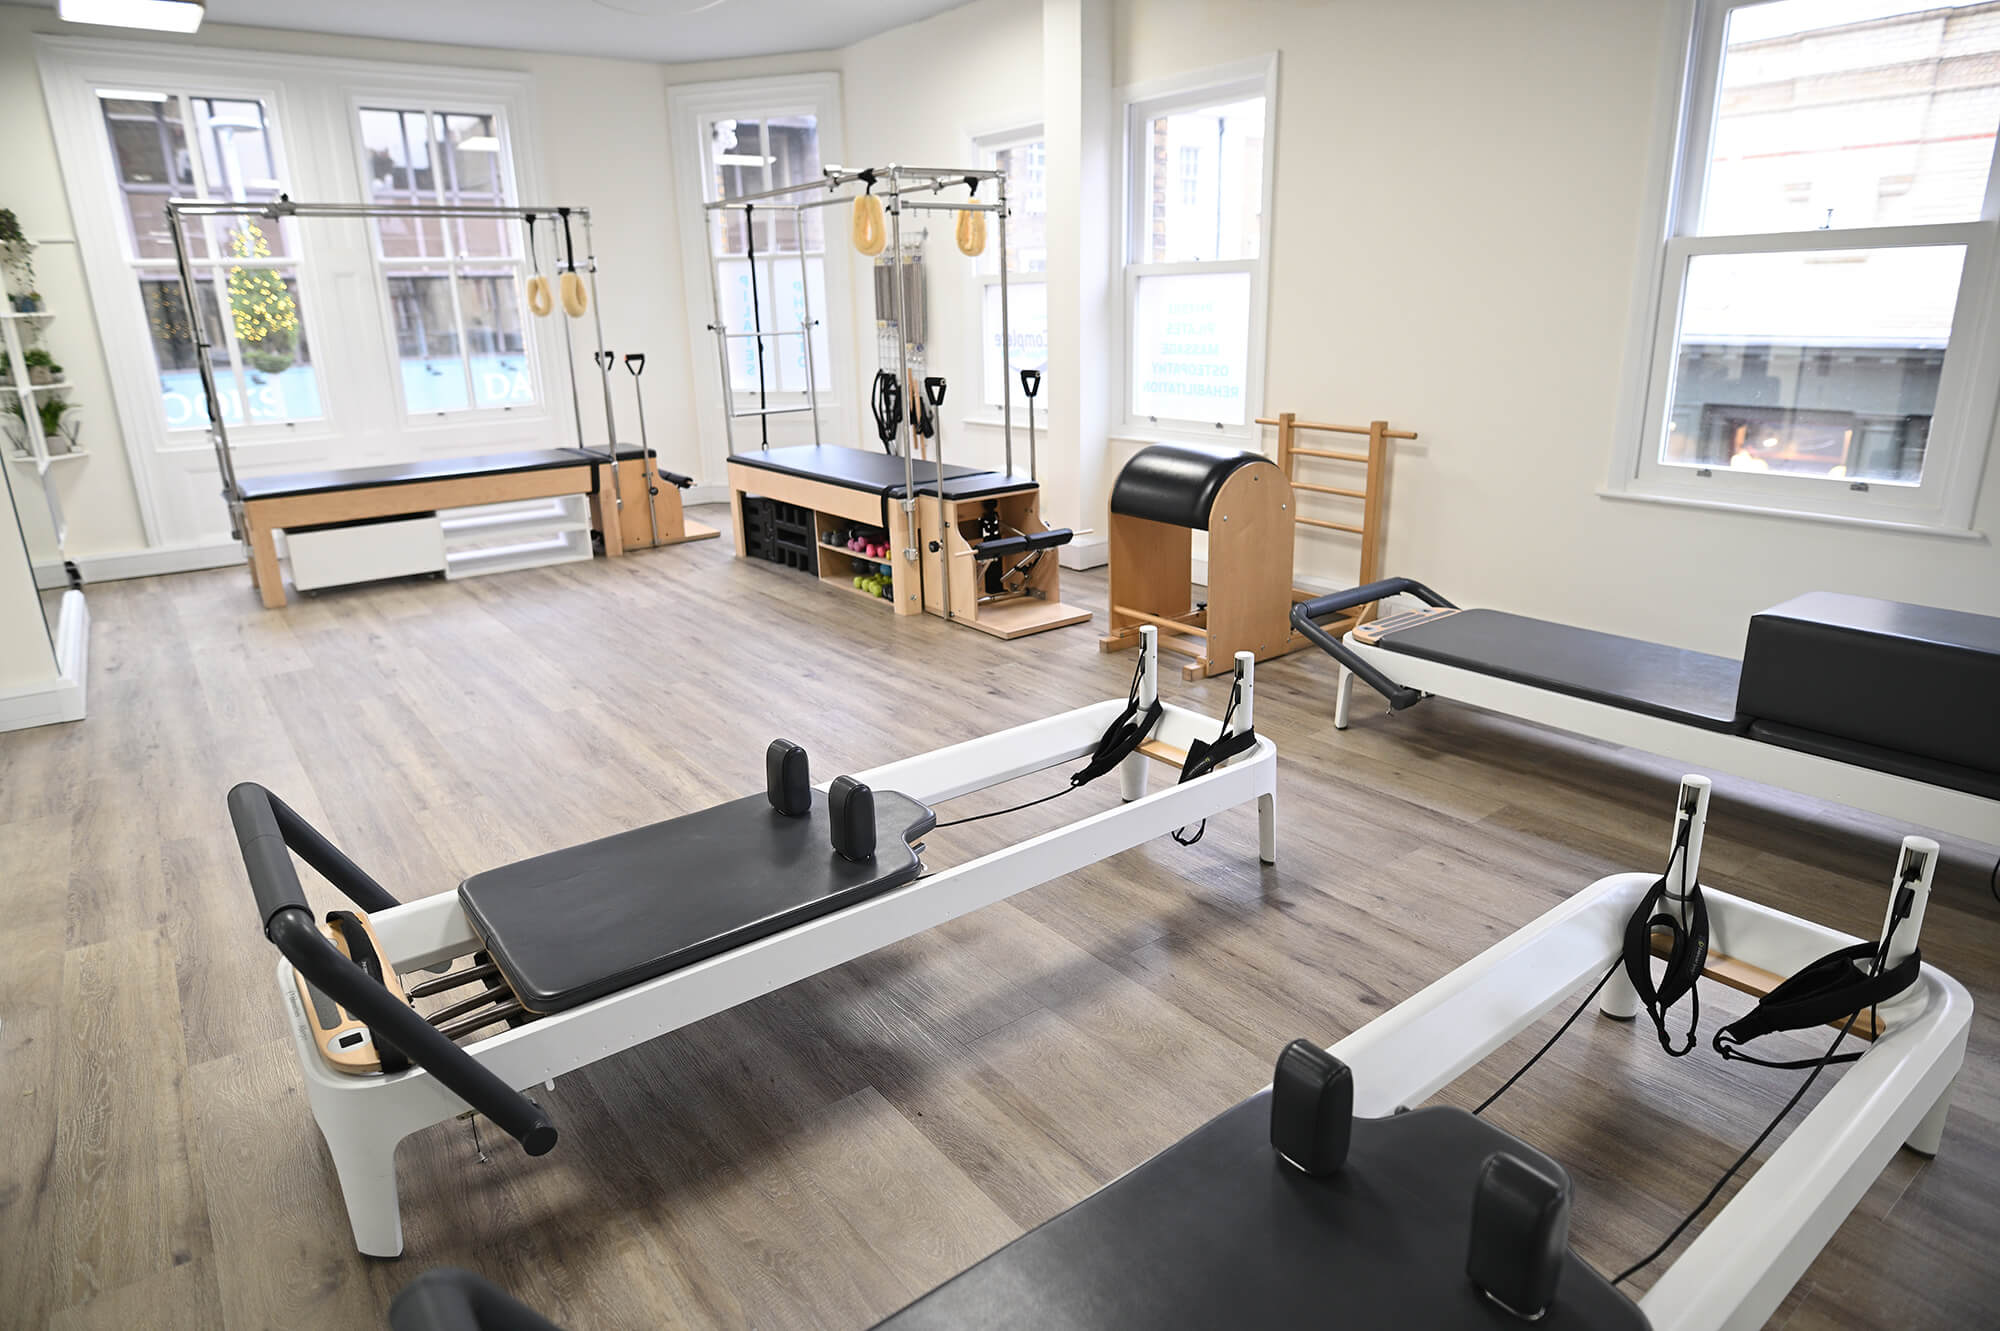 Pilates Reformer - What is it?